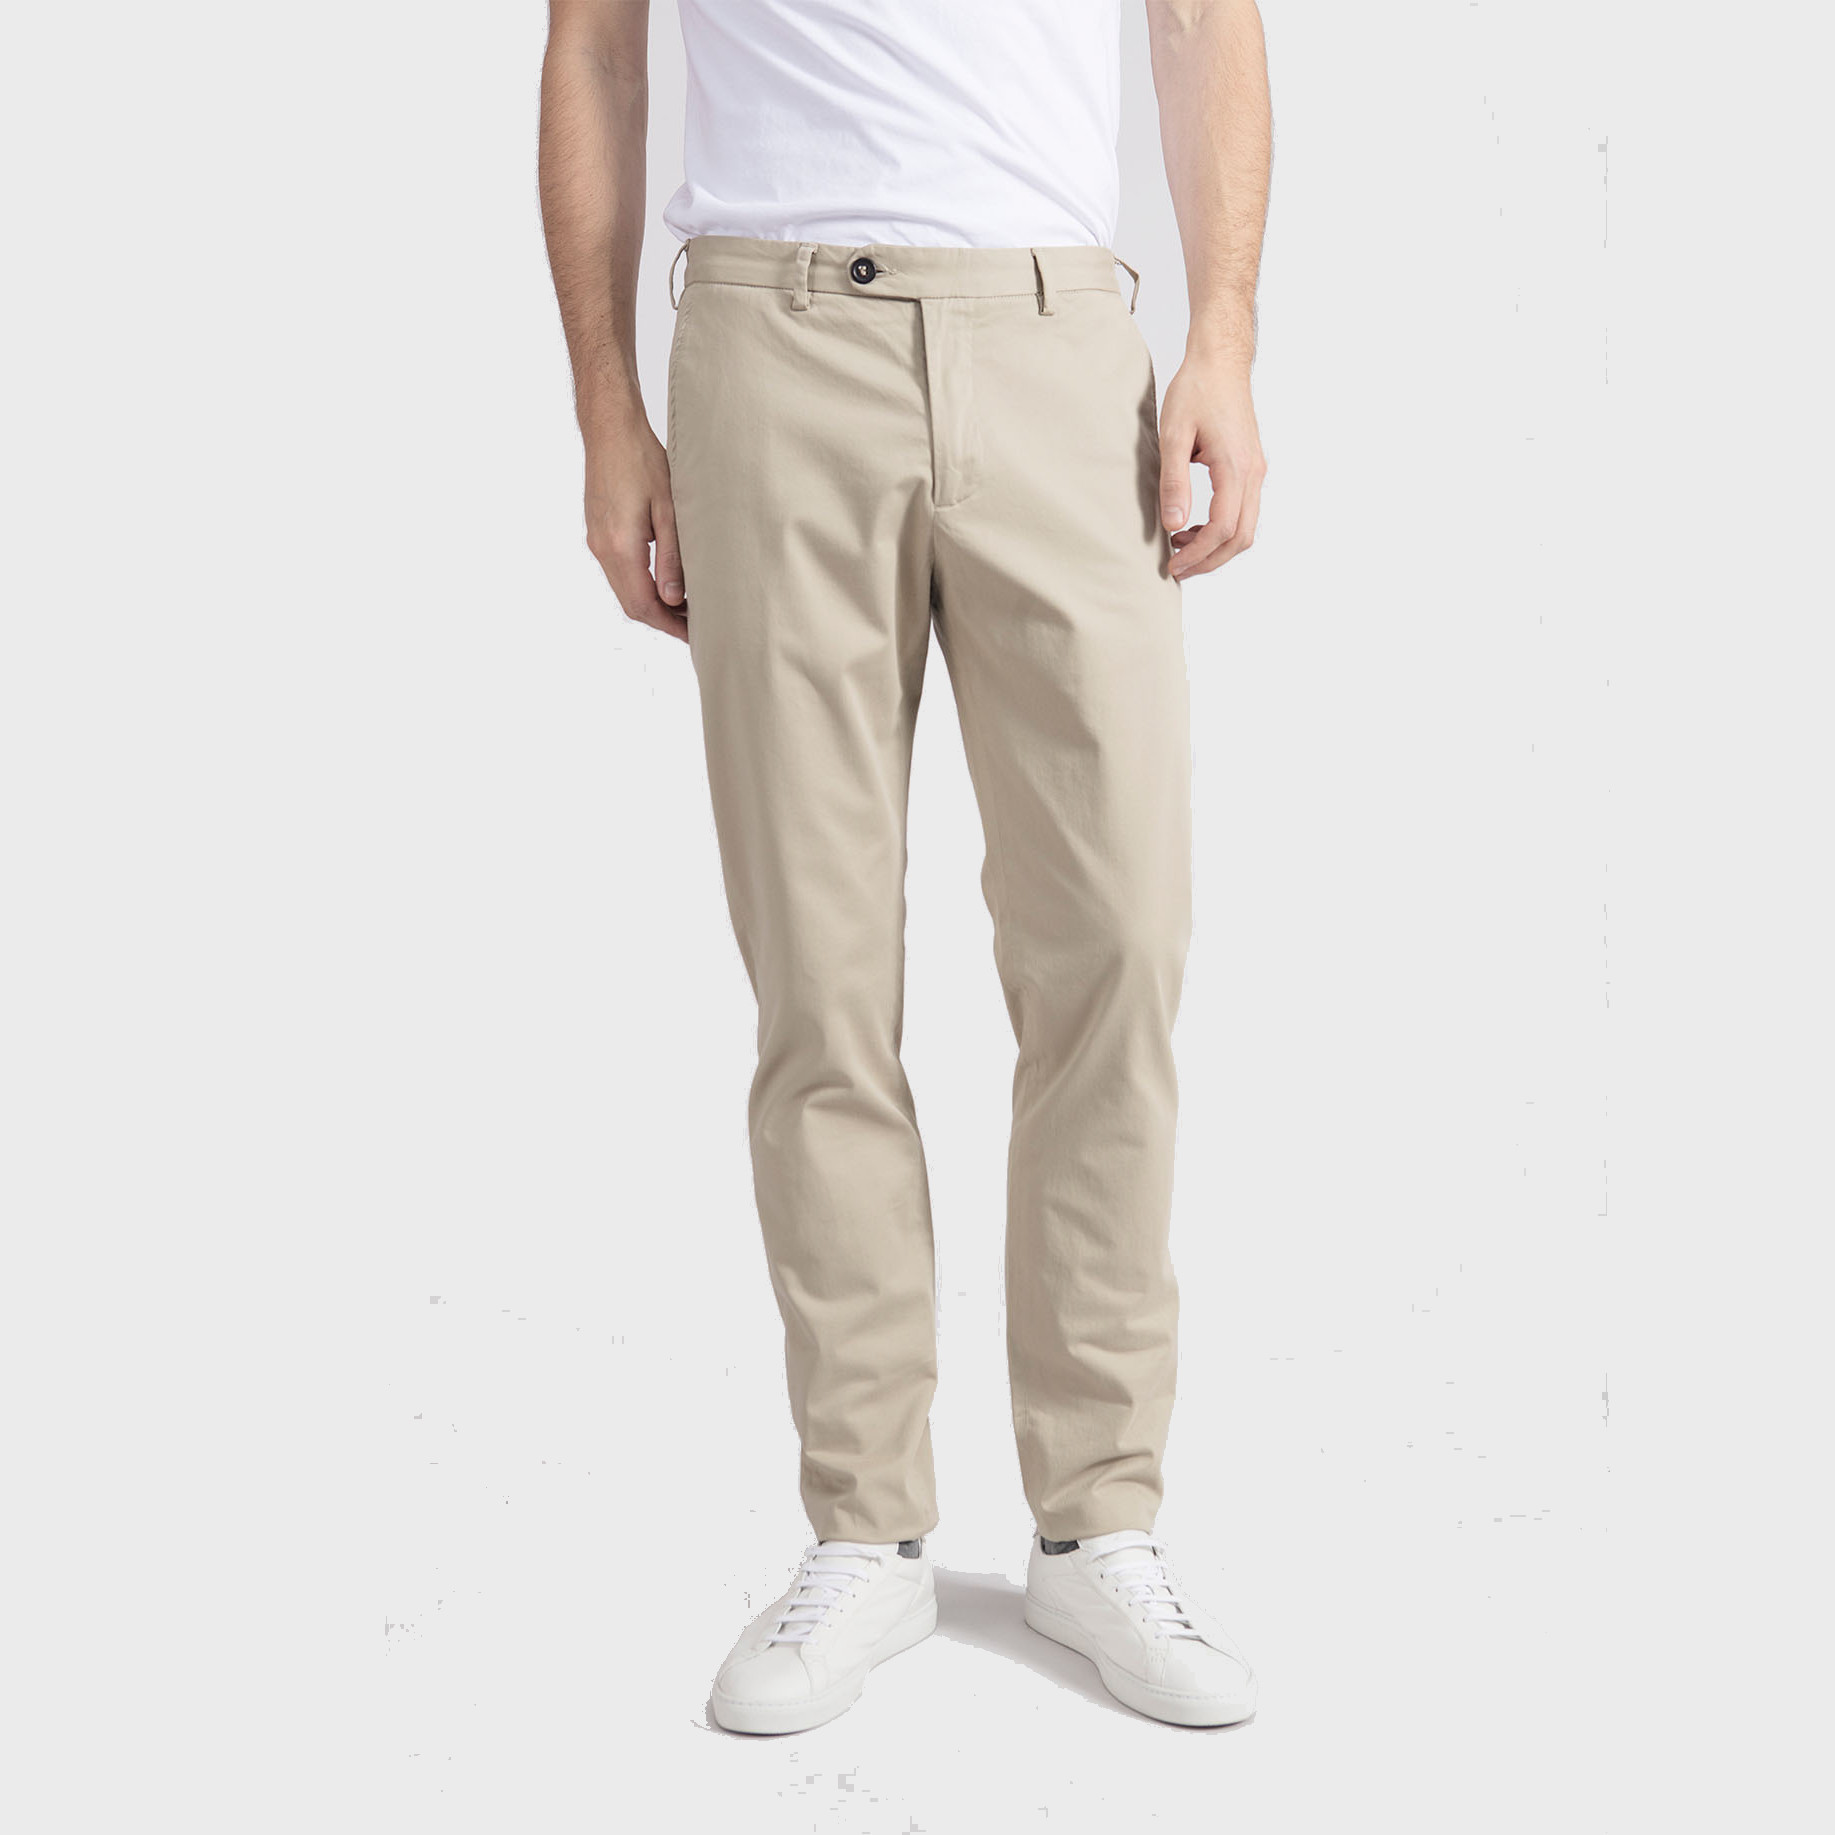 16 of the Best Men's Chinos - Muted.